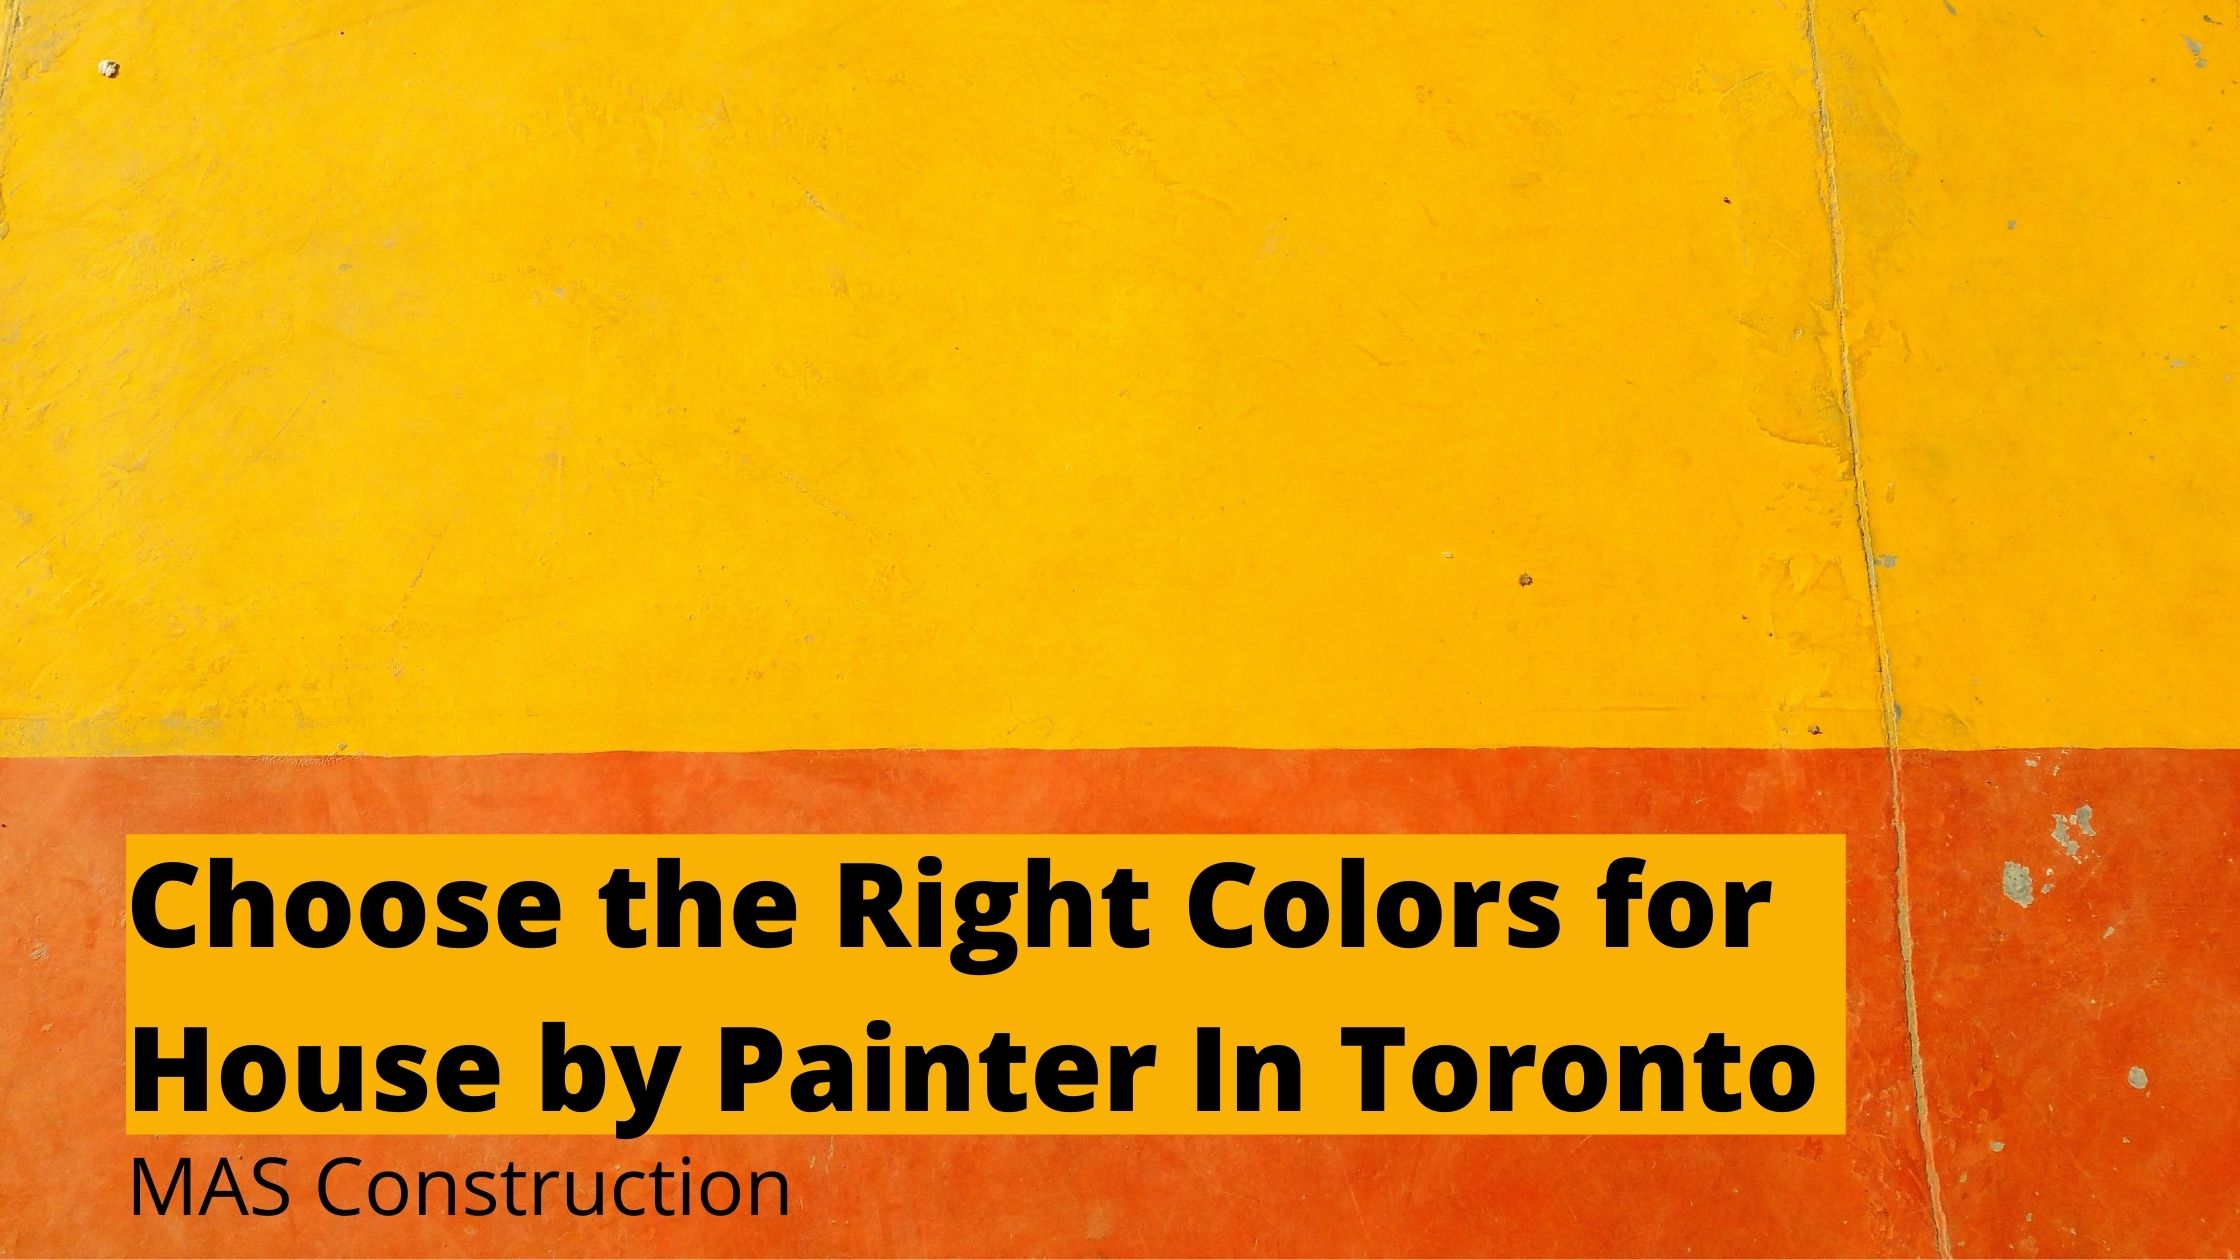 Painter-in-toronto-suggest-painting-colors